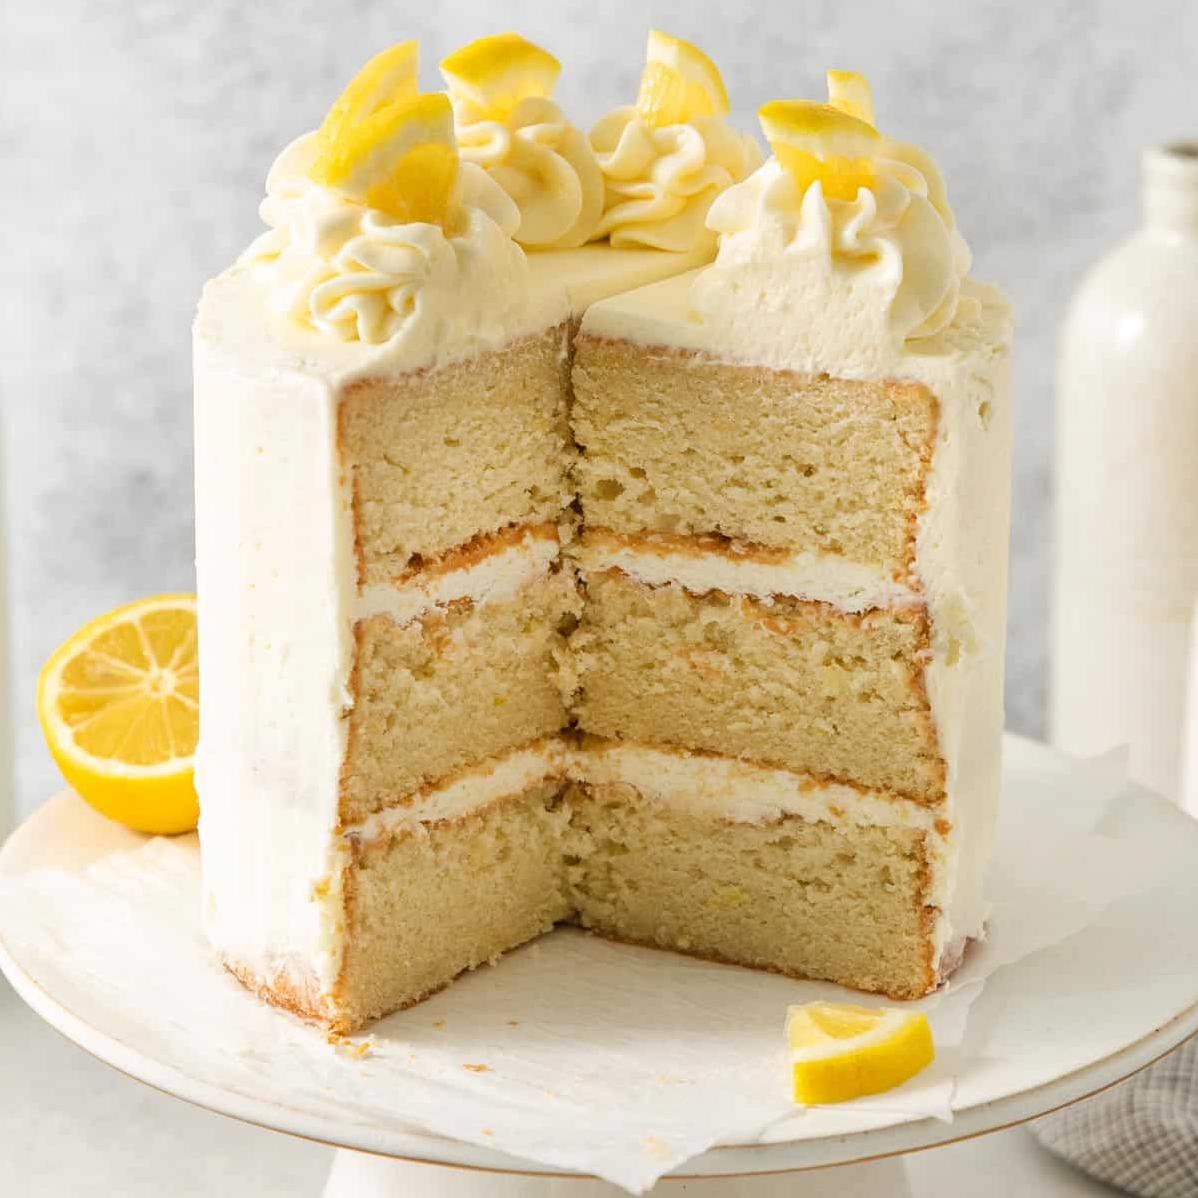  Perfect for brunch or dessert, this Lemon Layer Cake is a showstopper!